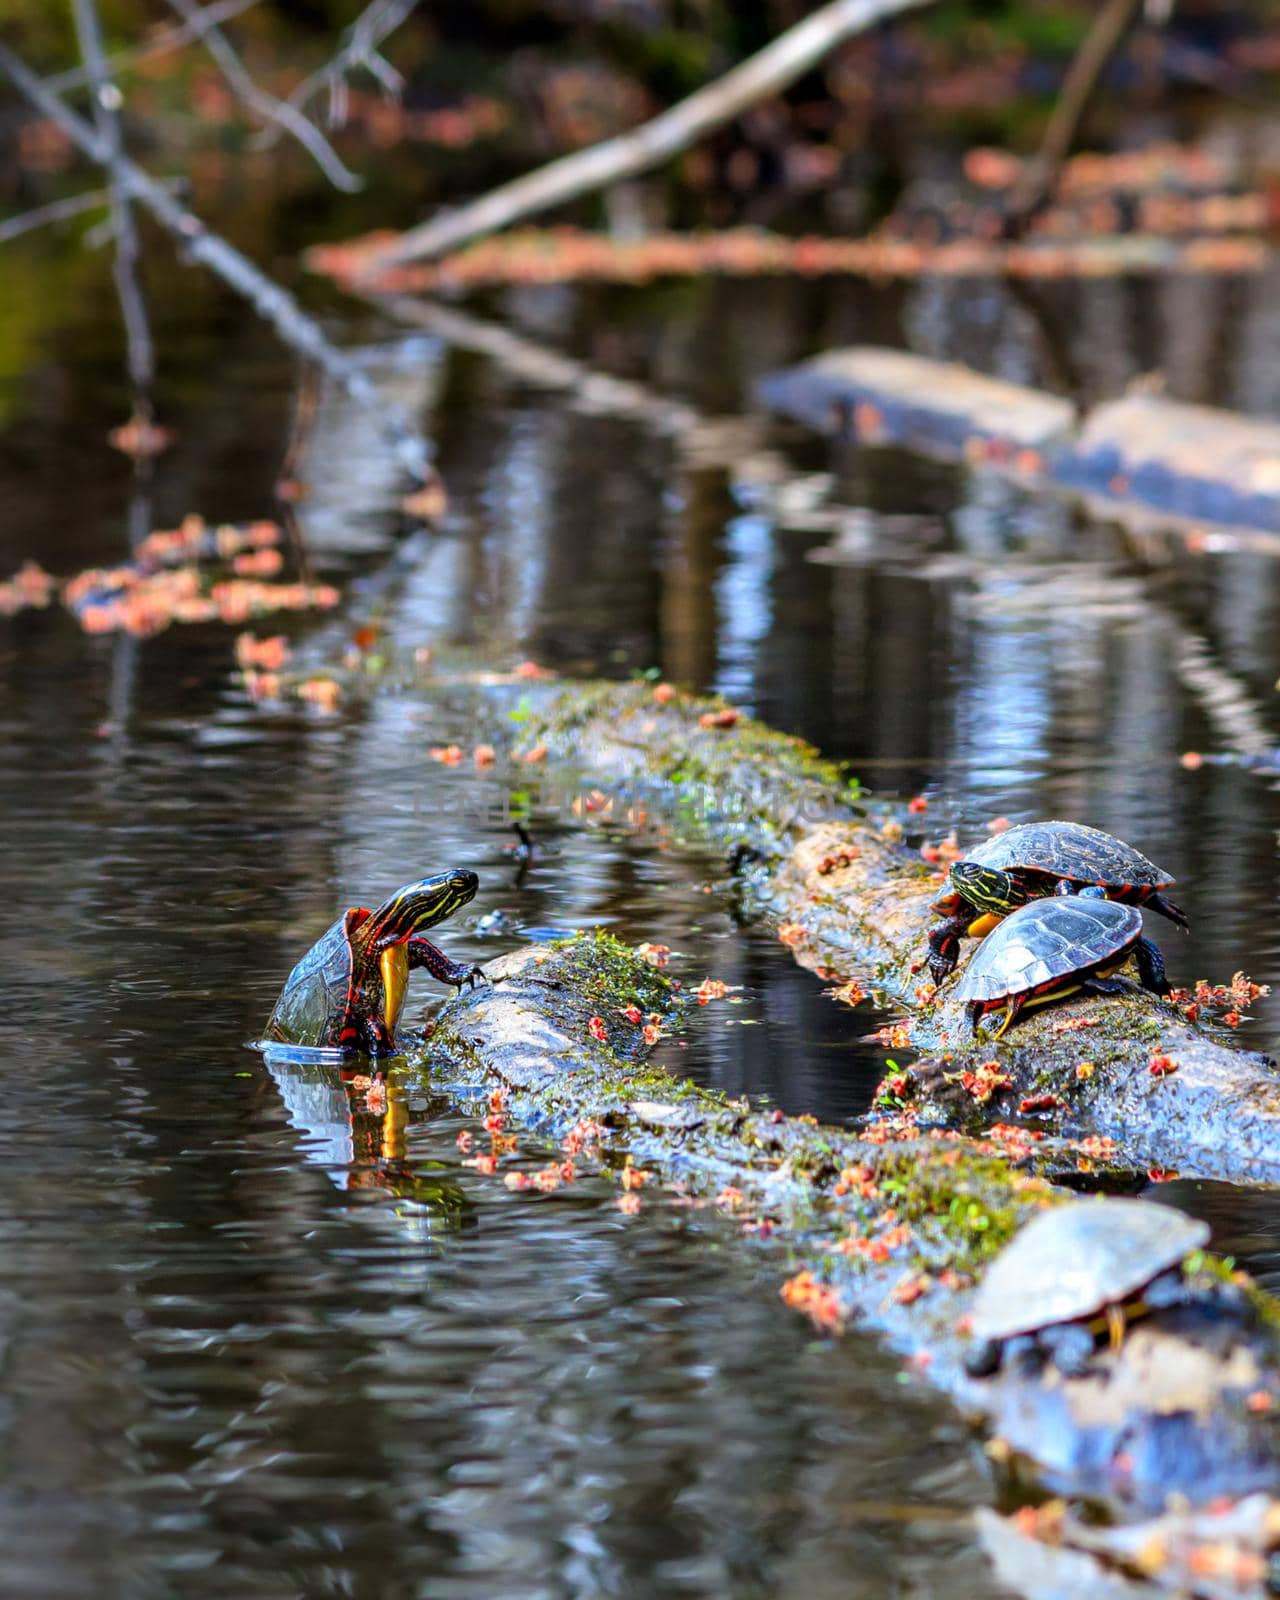 A midland painted turtle (Chrysemys picta marginata) climbs a floating log to join others sunning themselves in a pond. Fallen flowers of maple trees add pink and red to the green moss on the log.